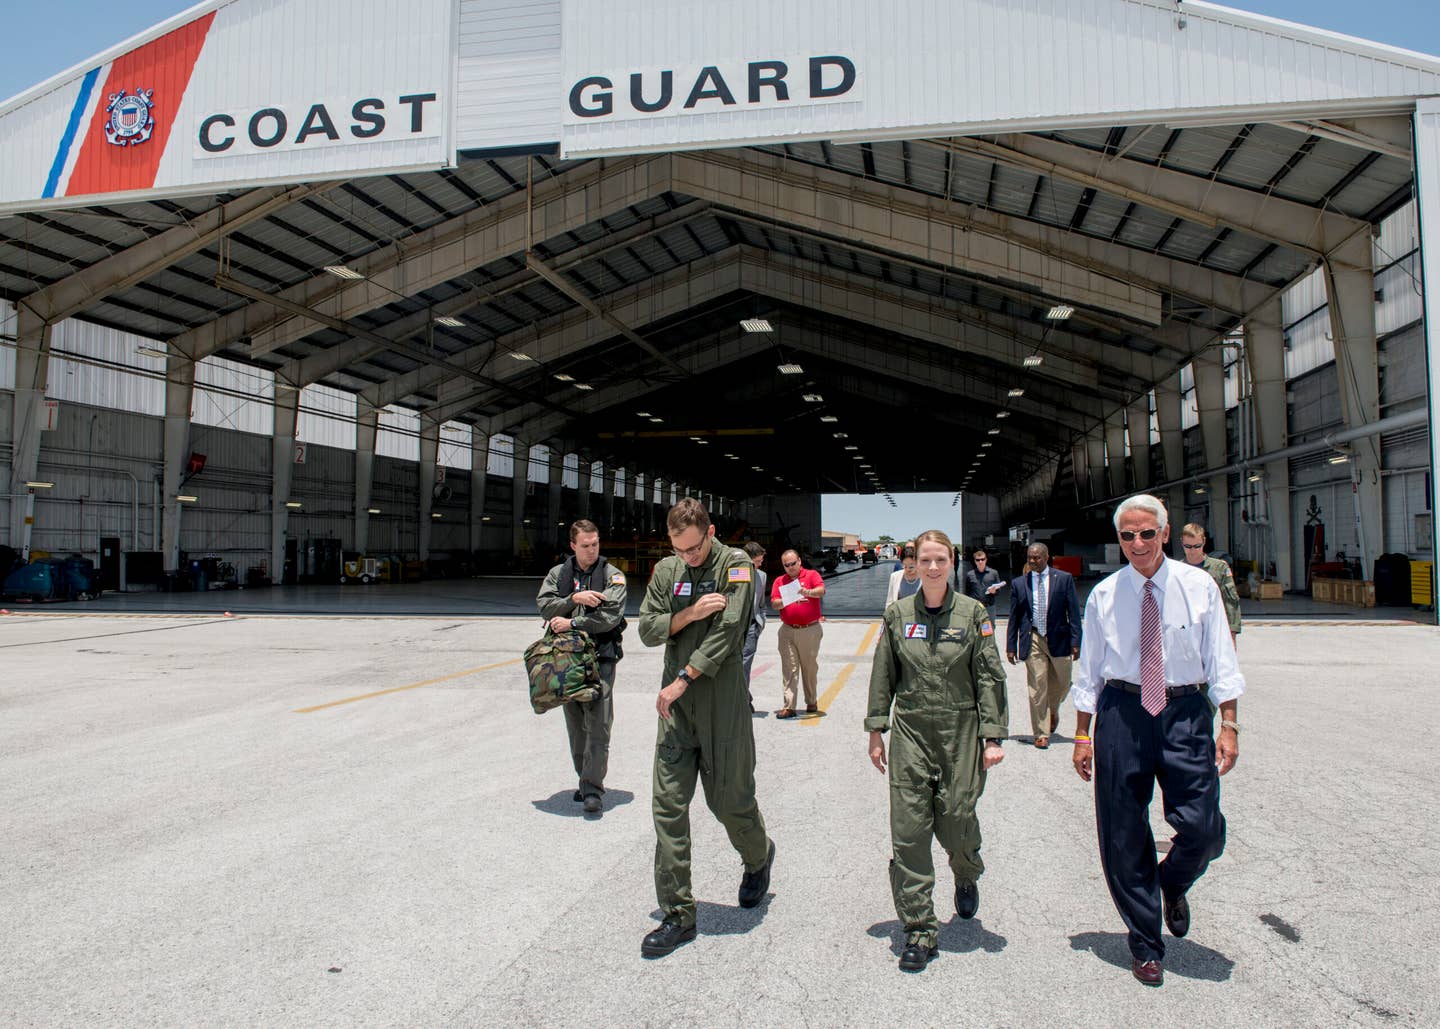 Congressman Charlie Crist, U.S. Representative for Florida's 13th District, right, speaks with Air Station Clearwater crew members Tuesday, May 30, 2017, prior to an aerial assessment of beach erosion along Pinellas County, Florida’s coast. Coast Guard Air Station Clearwater MH-60 Jayhawk helicopter crew members provided the overflight for the congressman and Army Corps of Engineers personnel. U.S. Coast Guard by Petty Officer 1st Class Michael De Nyse